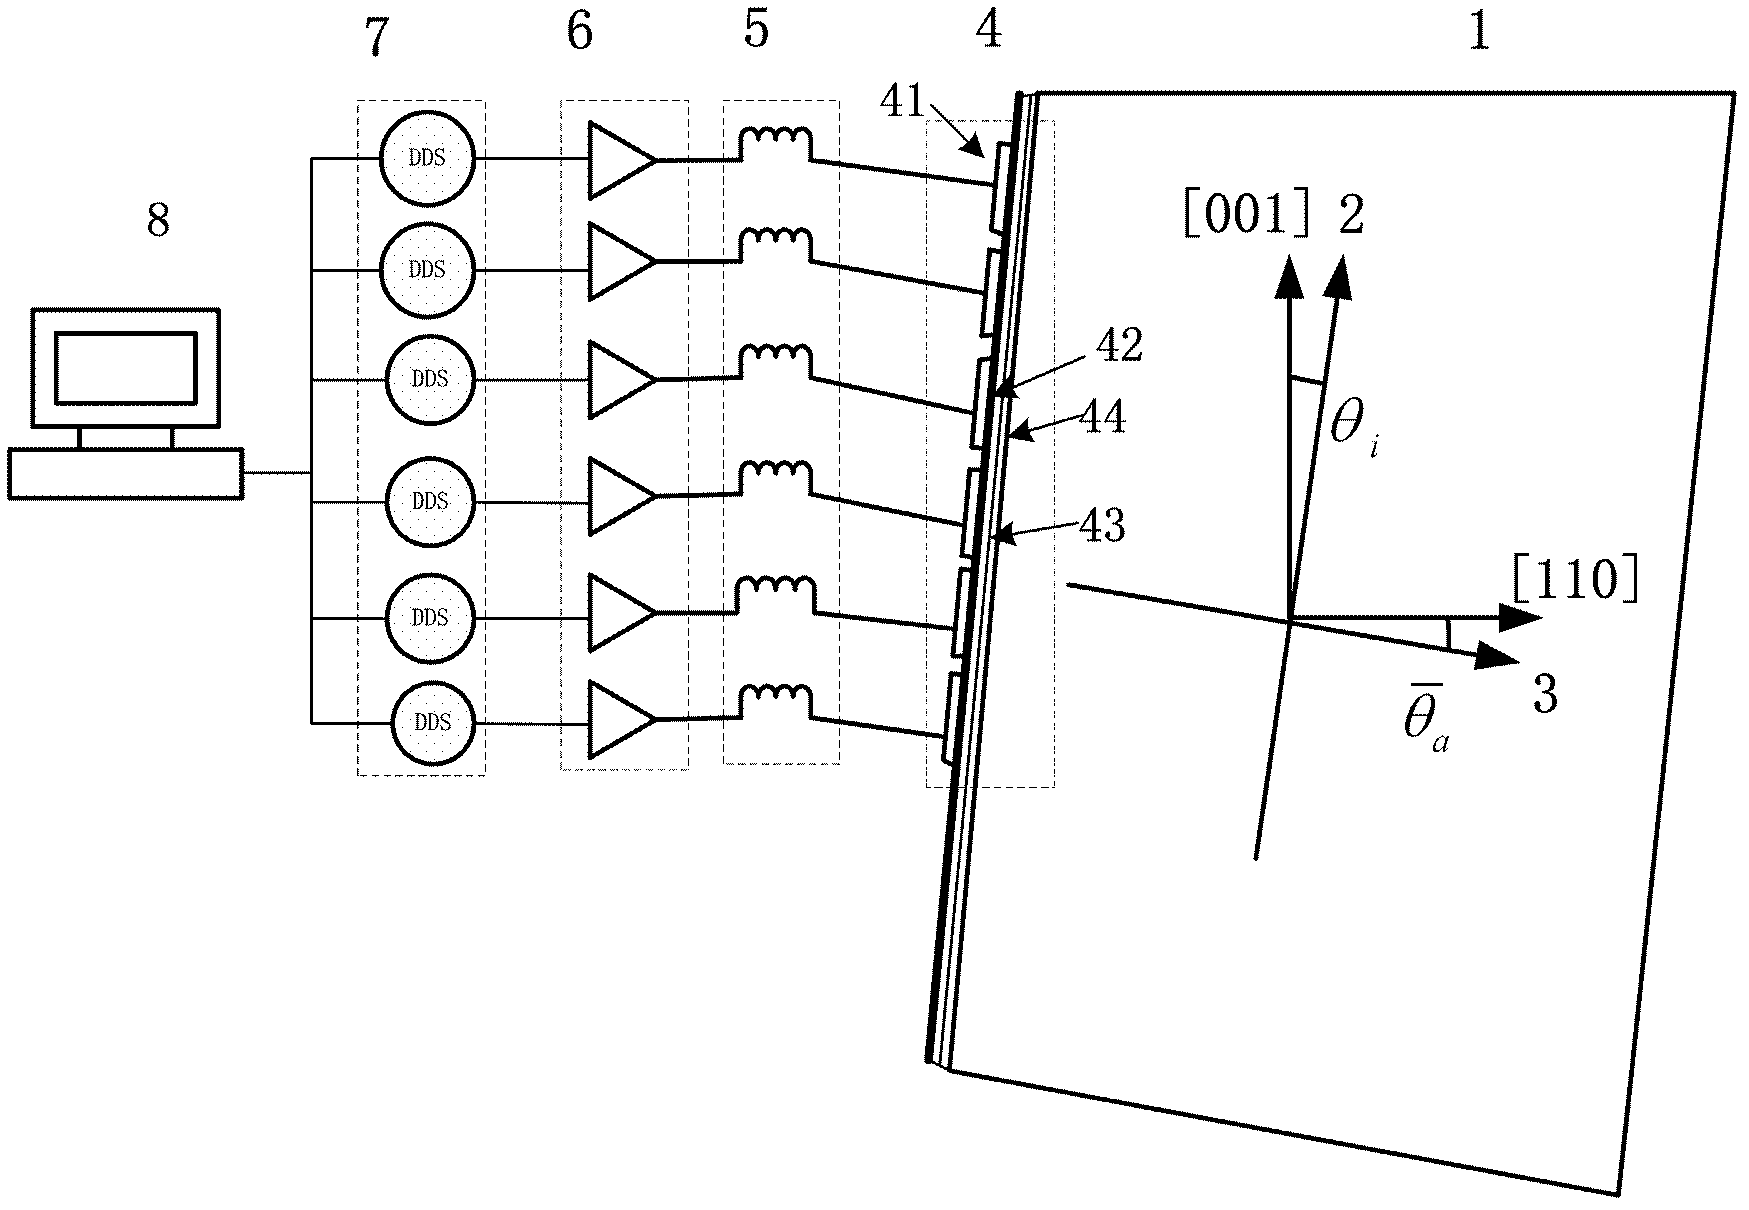 Acousto-optic deflector with phase-controlled transducer array